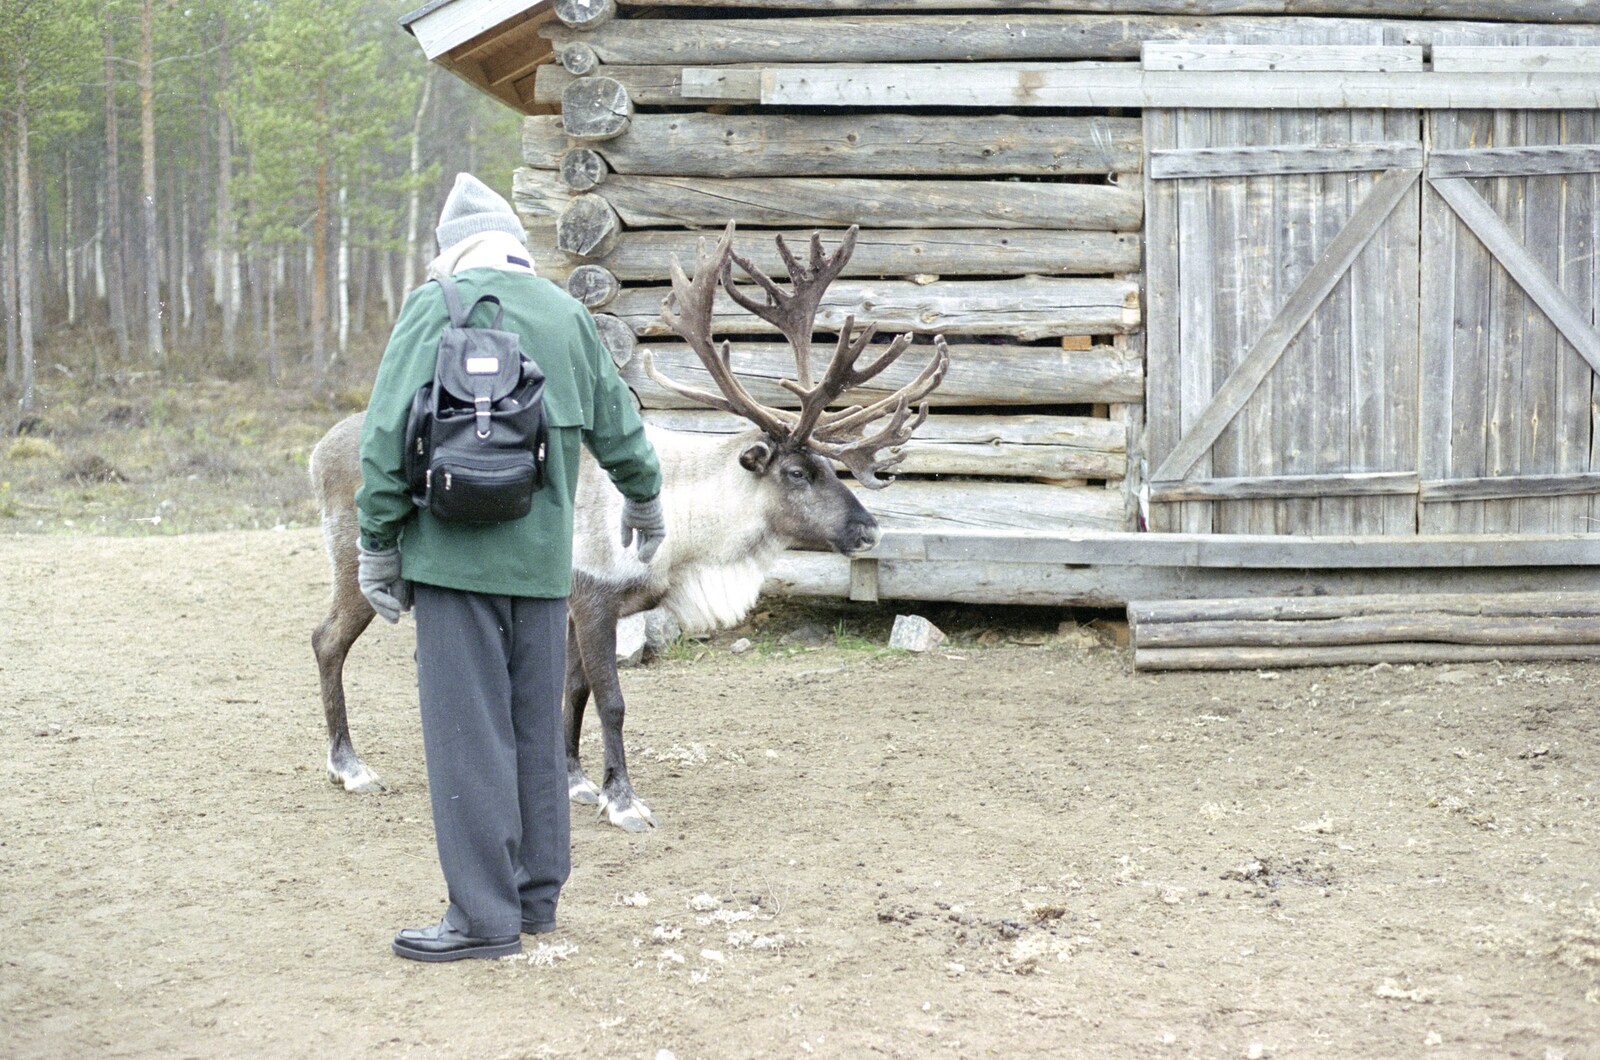 Dad interacts with a reindeer from A Trip to Rovaniemi and the Arctic Circle, Lapland, Finland - 28th November 1999